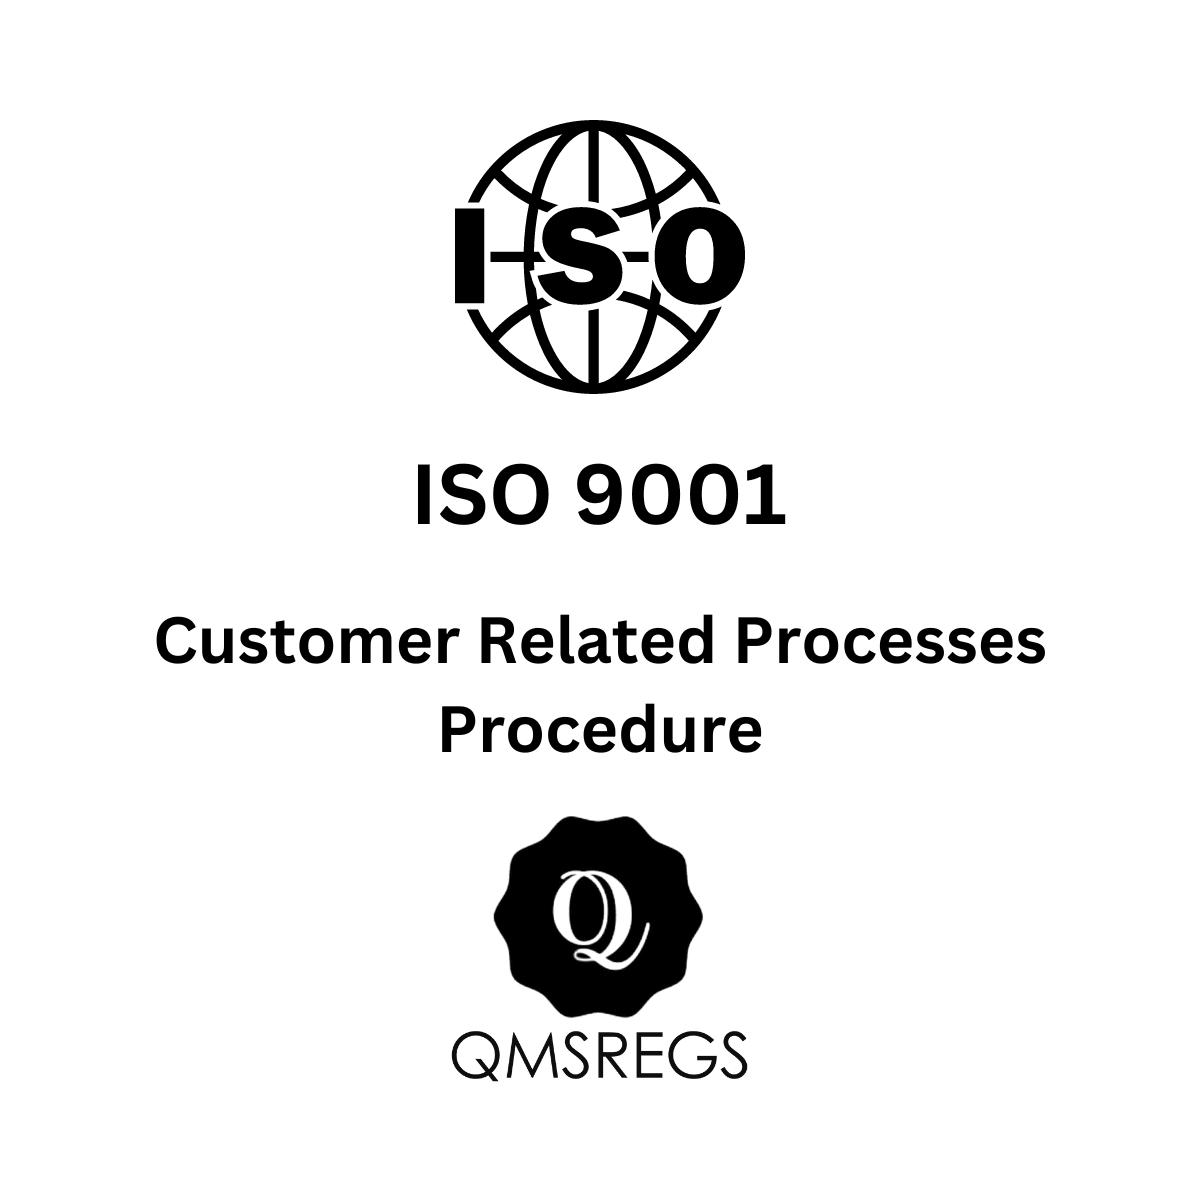 ISO 9001 Customer Related Processes Procedure